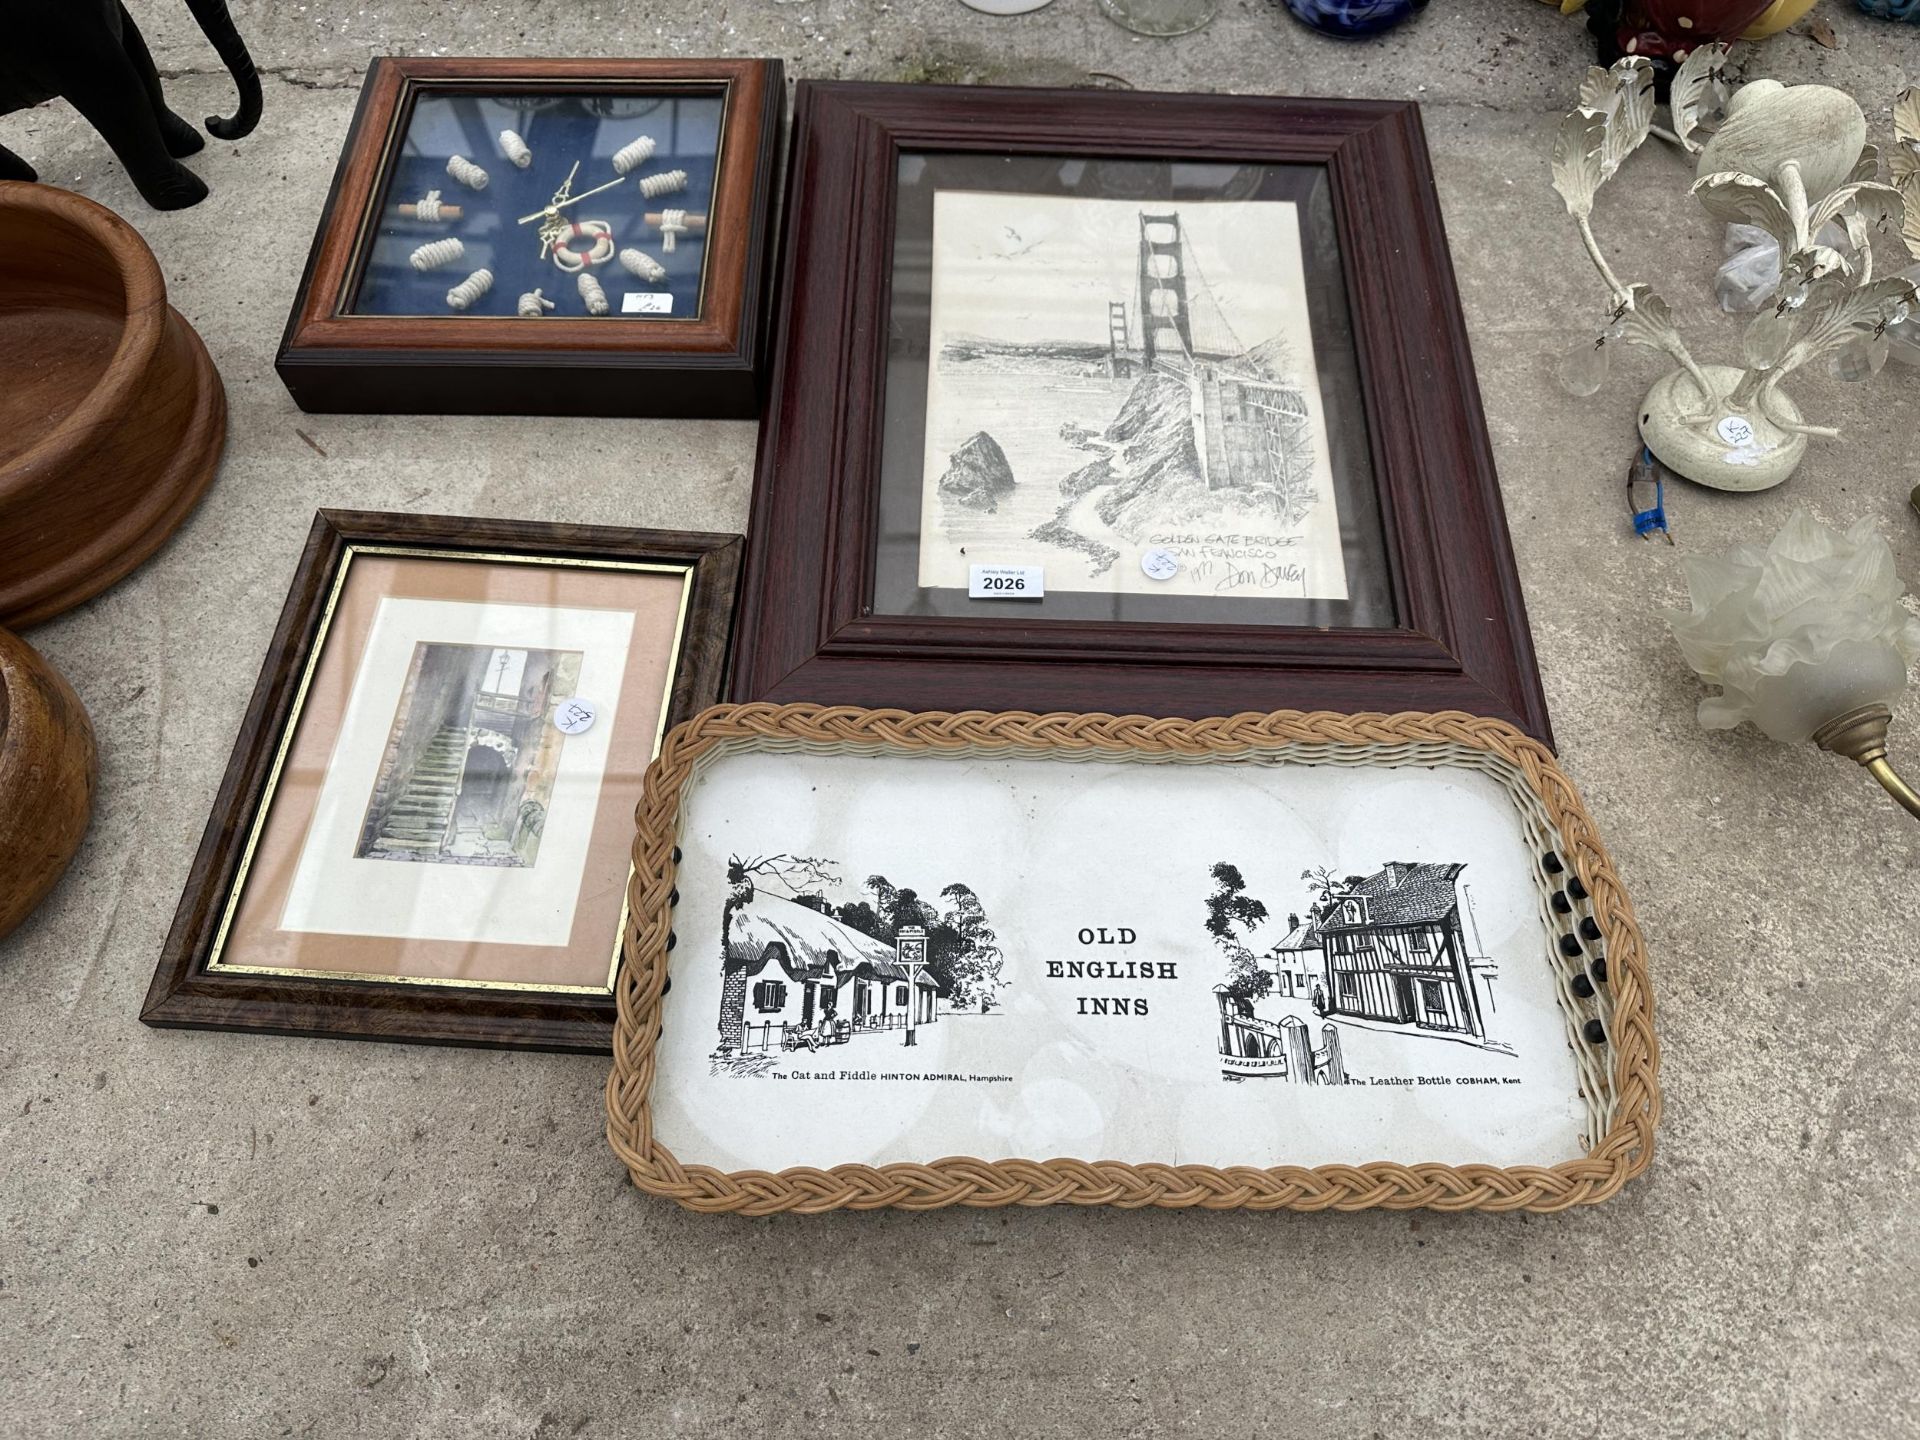 TWO FRAMED PRINTS, A FRAMED NAUTICAL CLOCK AND A TTRAY ETC